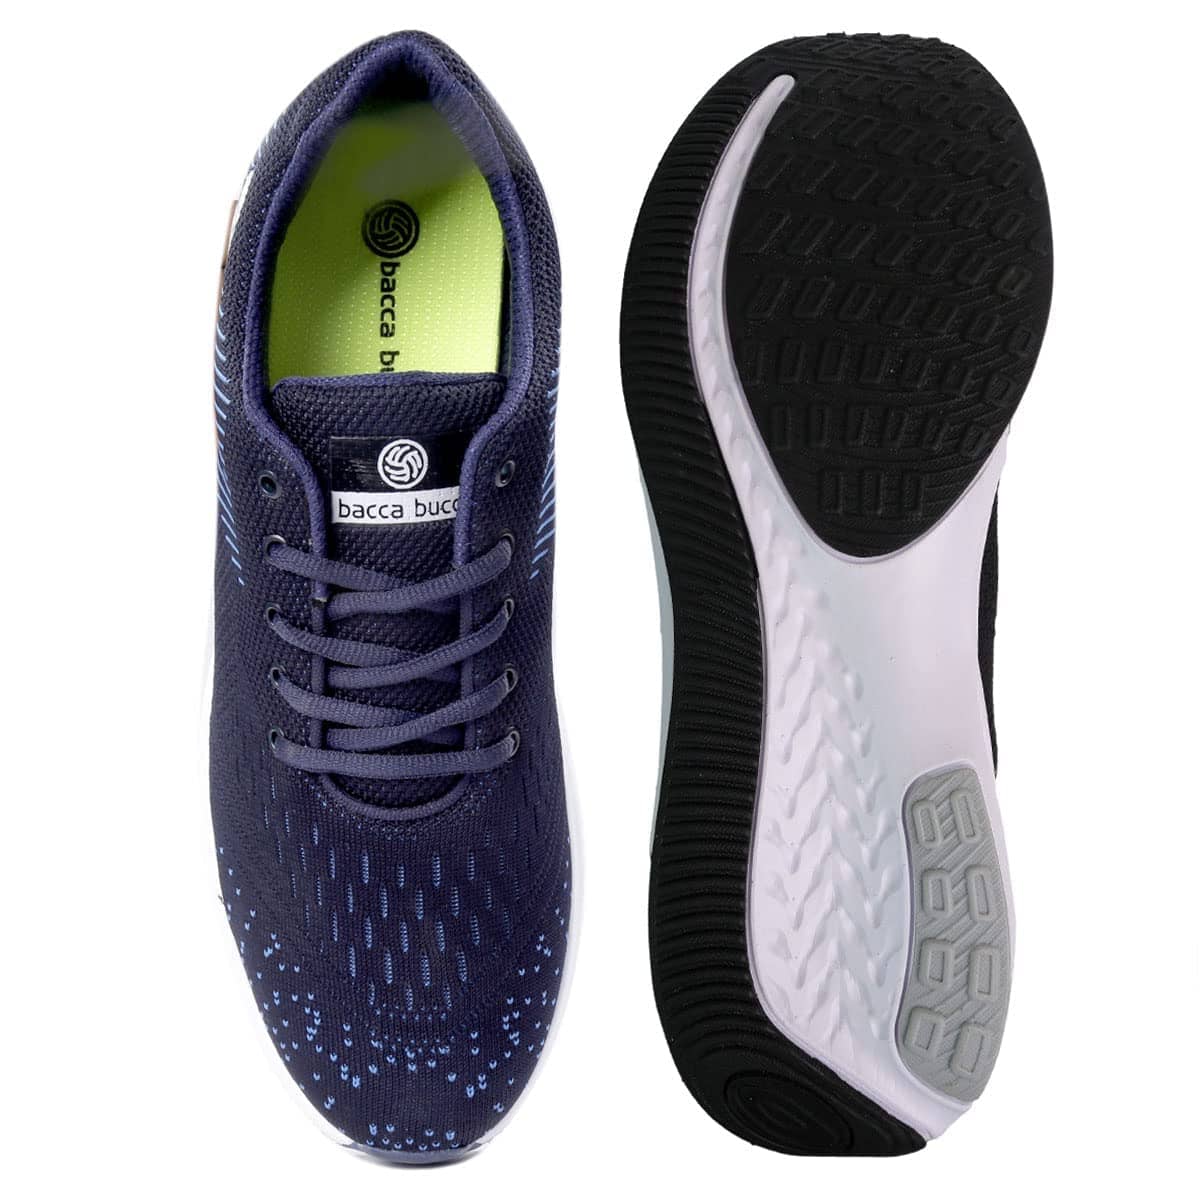 Bacca Bucci Running Shoes Lightweight Fashion Tennis Athletic Shoes for Outdoor Sports- PLUS size available - Bacca Bucci